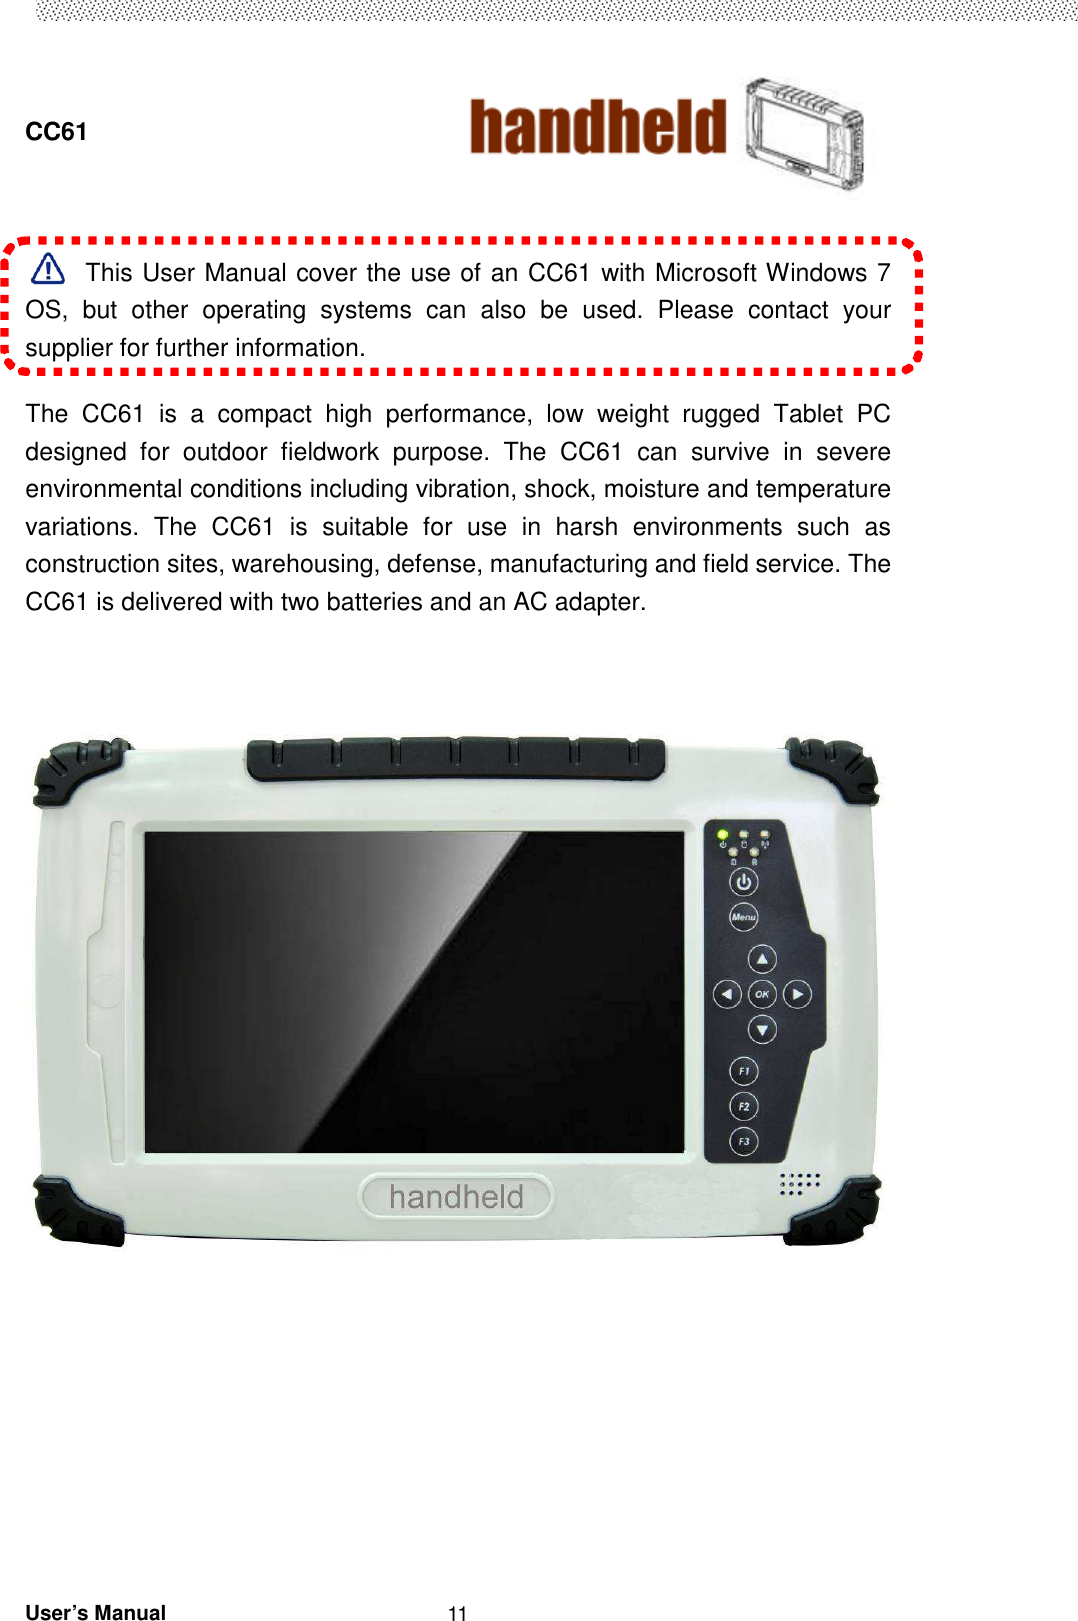  CC61                                       User’s Manual                                                   11  This User Manual cover the use of an CC61 with Microsoft Windows 7 OS,  but  other  operating  systems  can  also  be  used.  Please  contact  your supplier for further information.  The  CC61  is  a  compact  high  performance,  low  weight  rugged  Tablet  PC designed  for  outdoor  fieldwork  purpose.  The  CC61  can  survive  in  severe environmental conditions including vibration, shock, moisture and temperature variations.  The  CC61  is  suitable  for  use  in  harsh  environments  such  as construction sites, warehousing, defense, manufacturing and field service. The CC61 is delivered with two batteries and an AC adapter.               